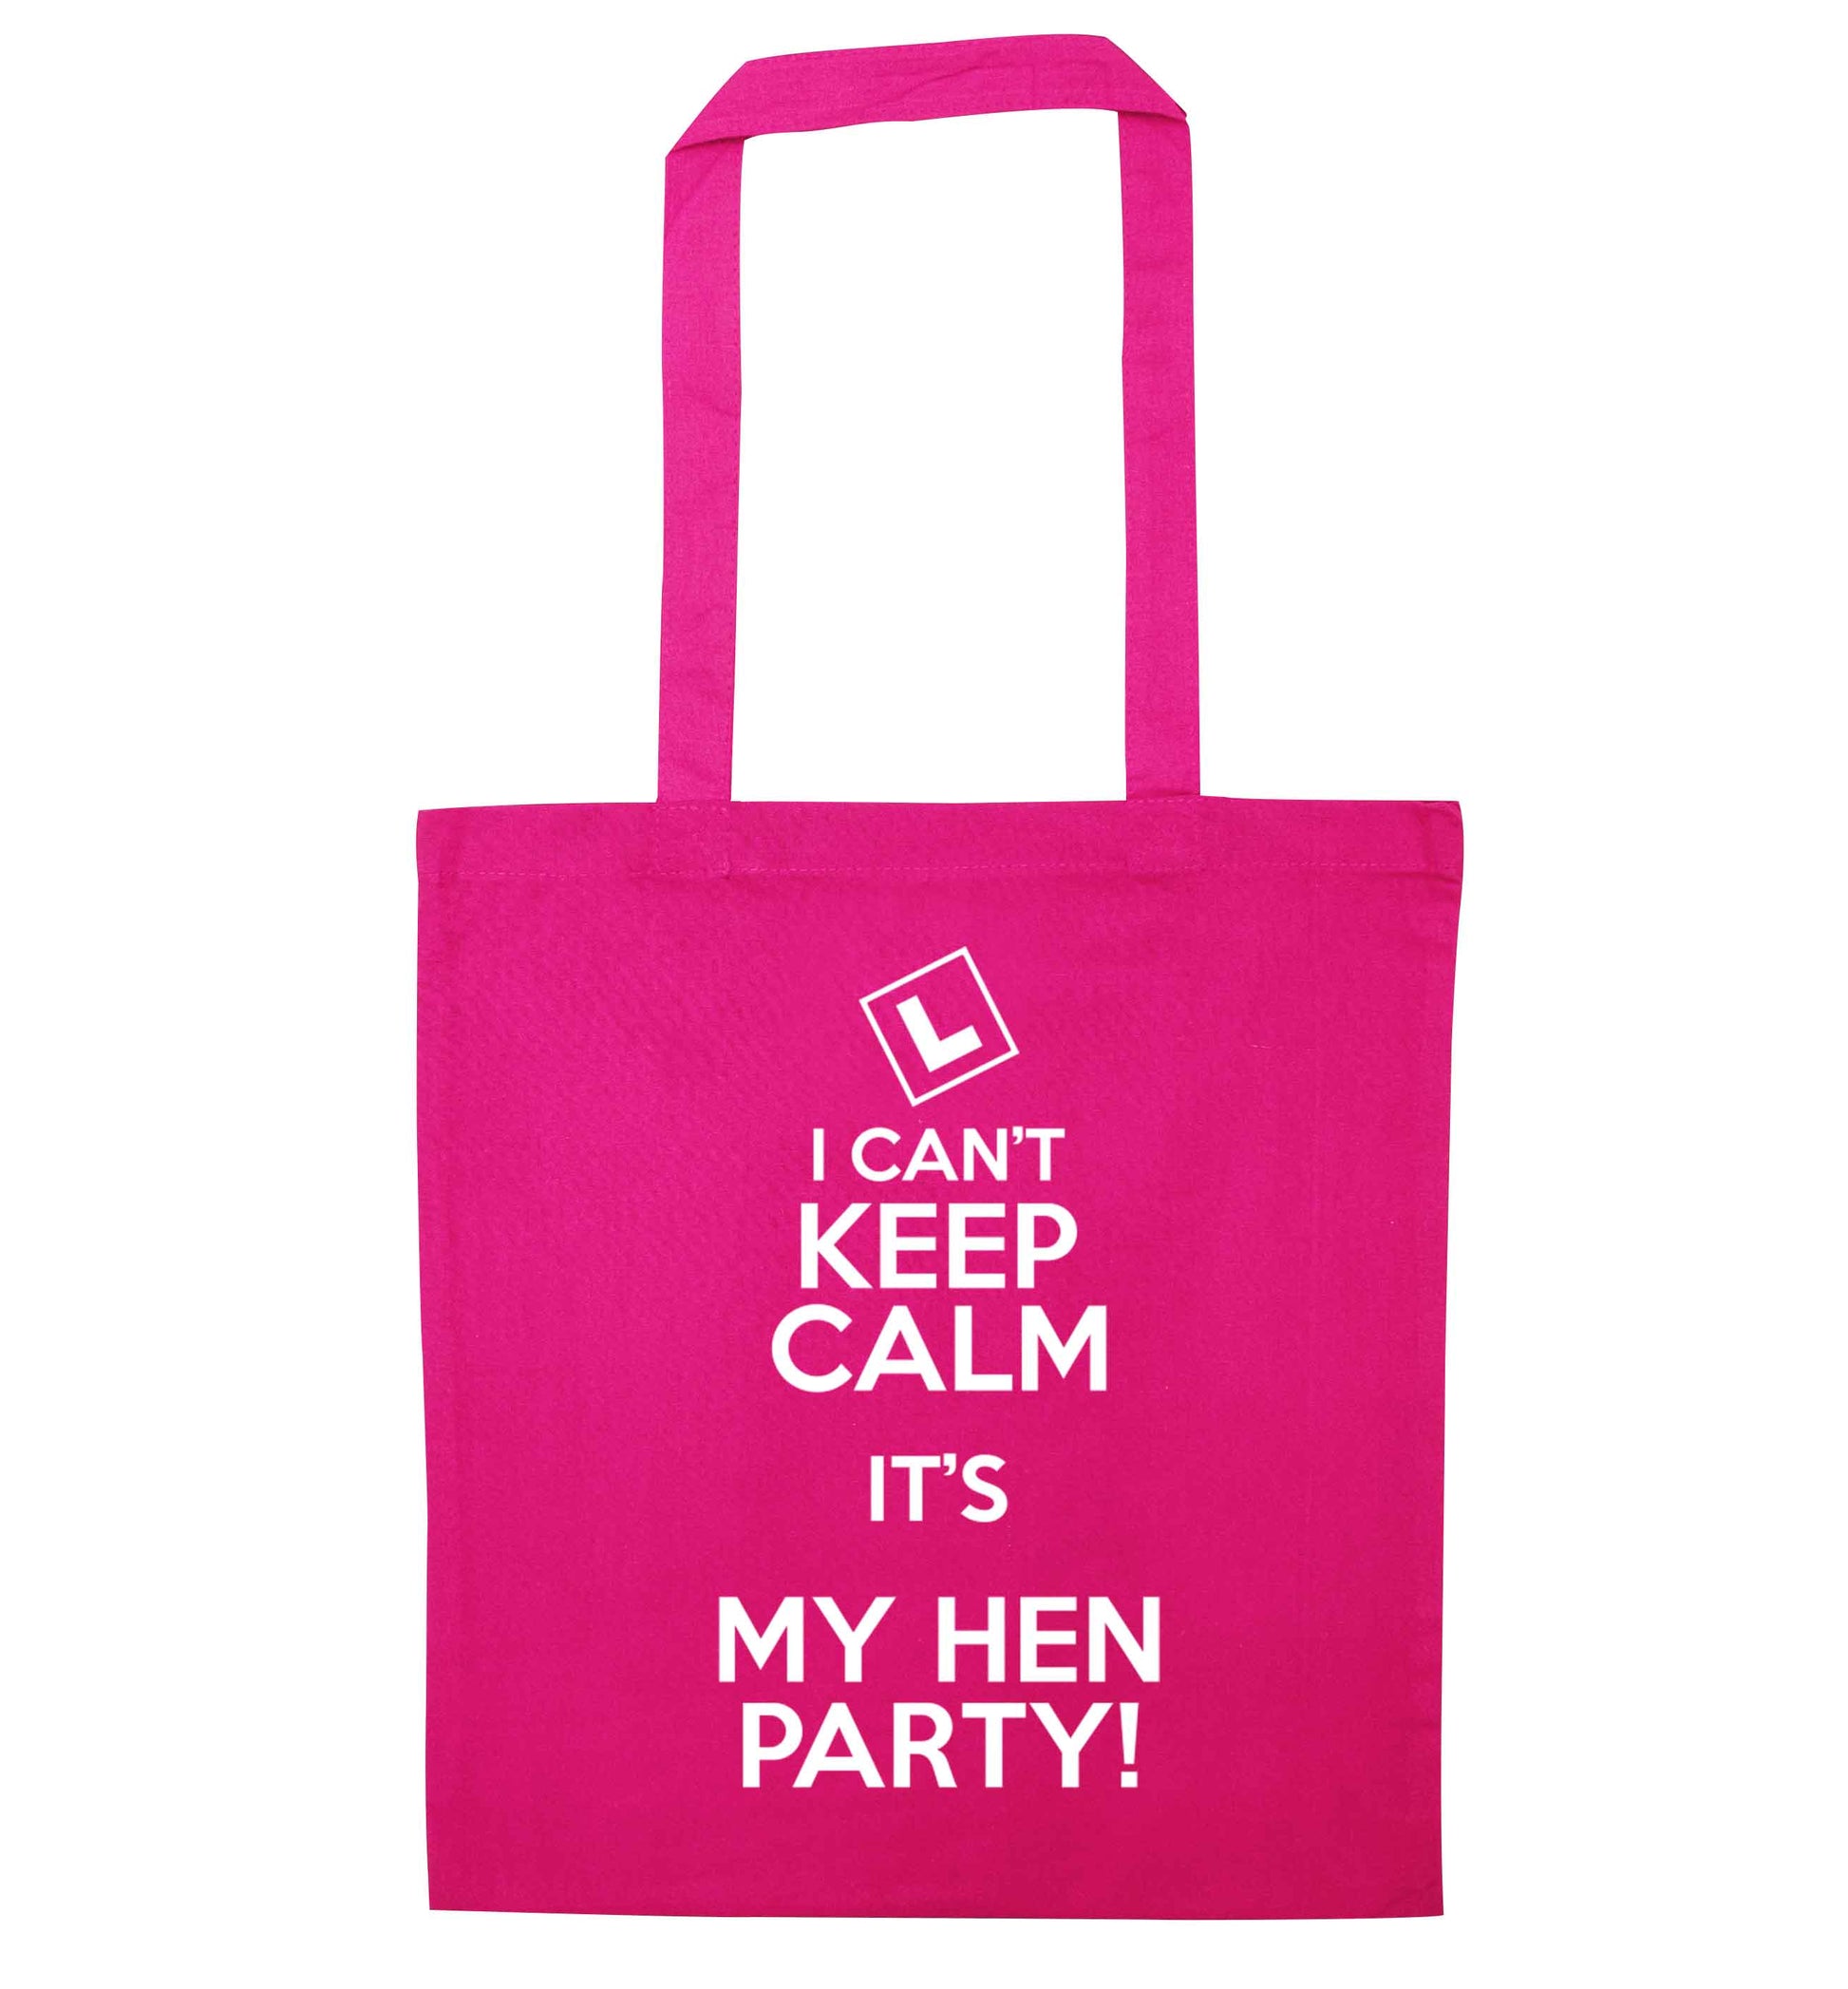 I can't keep calm it's my hen party pink tote bag